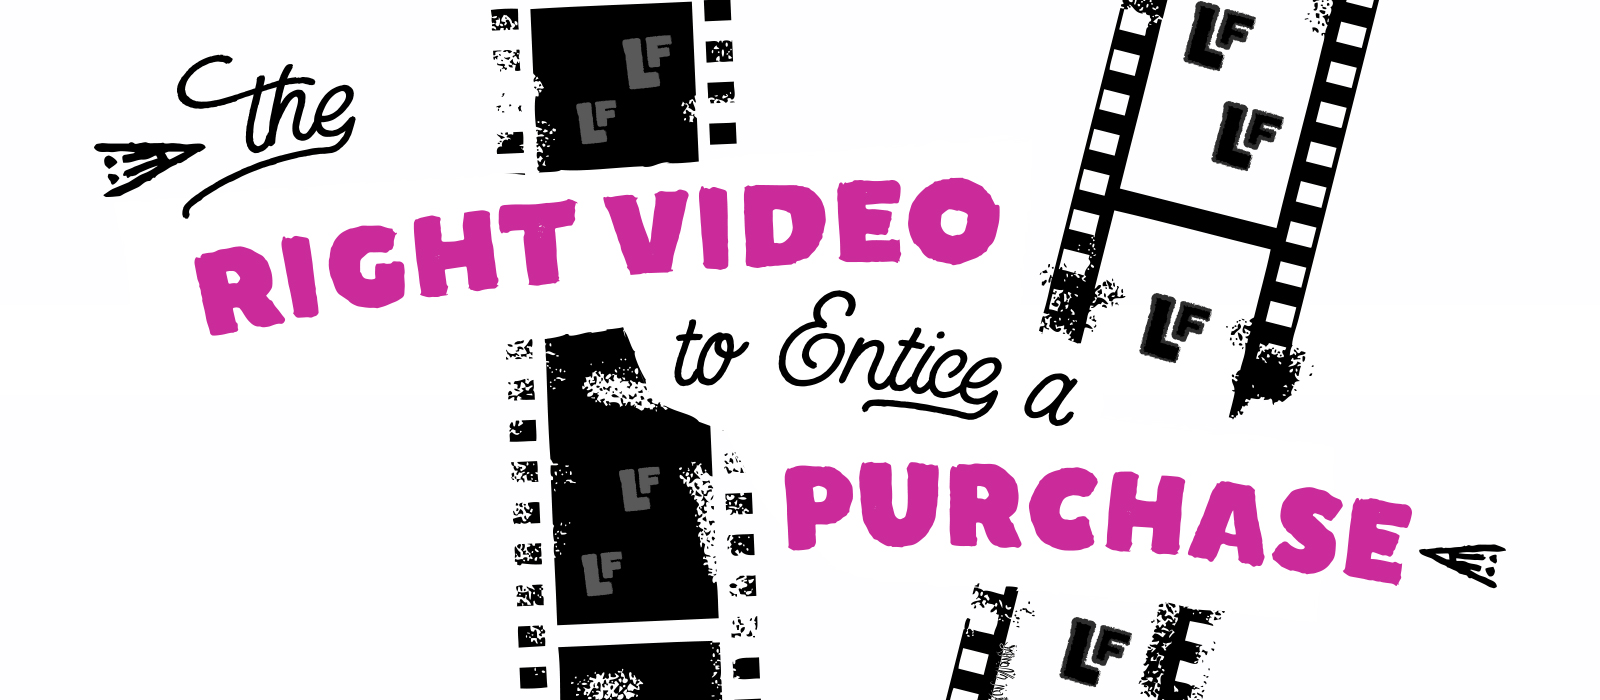 Right-Video-to-Entice